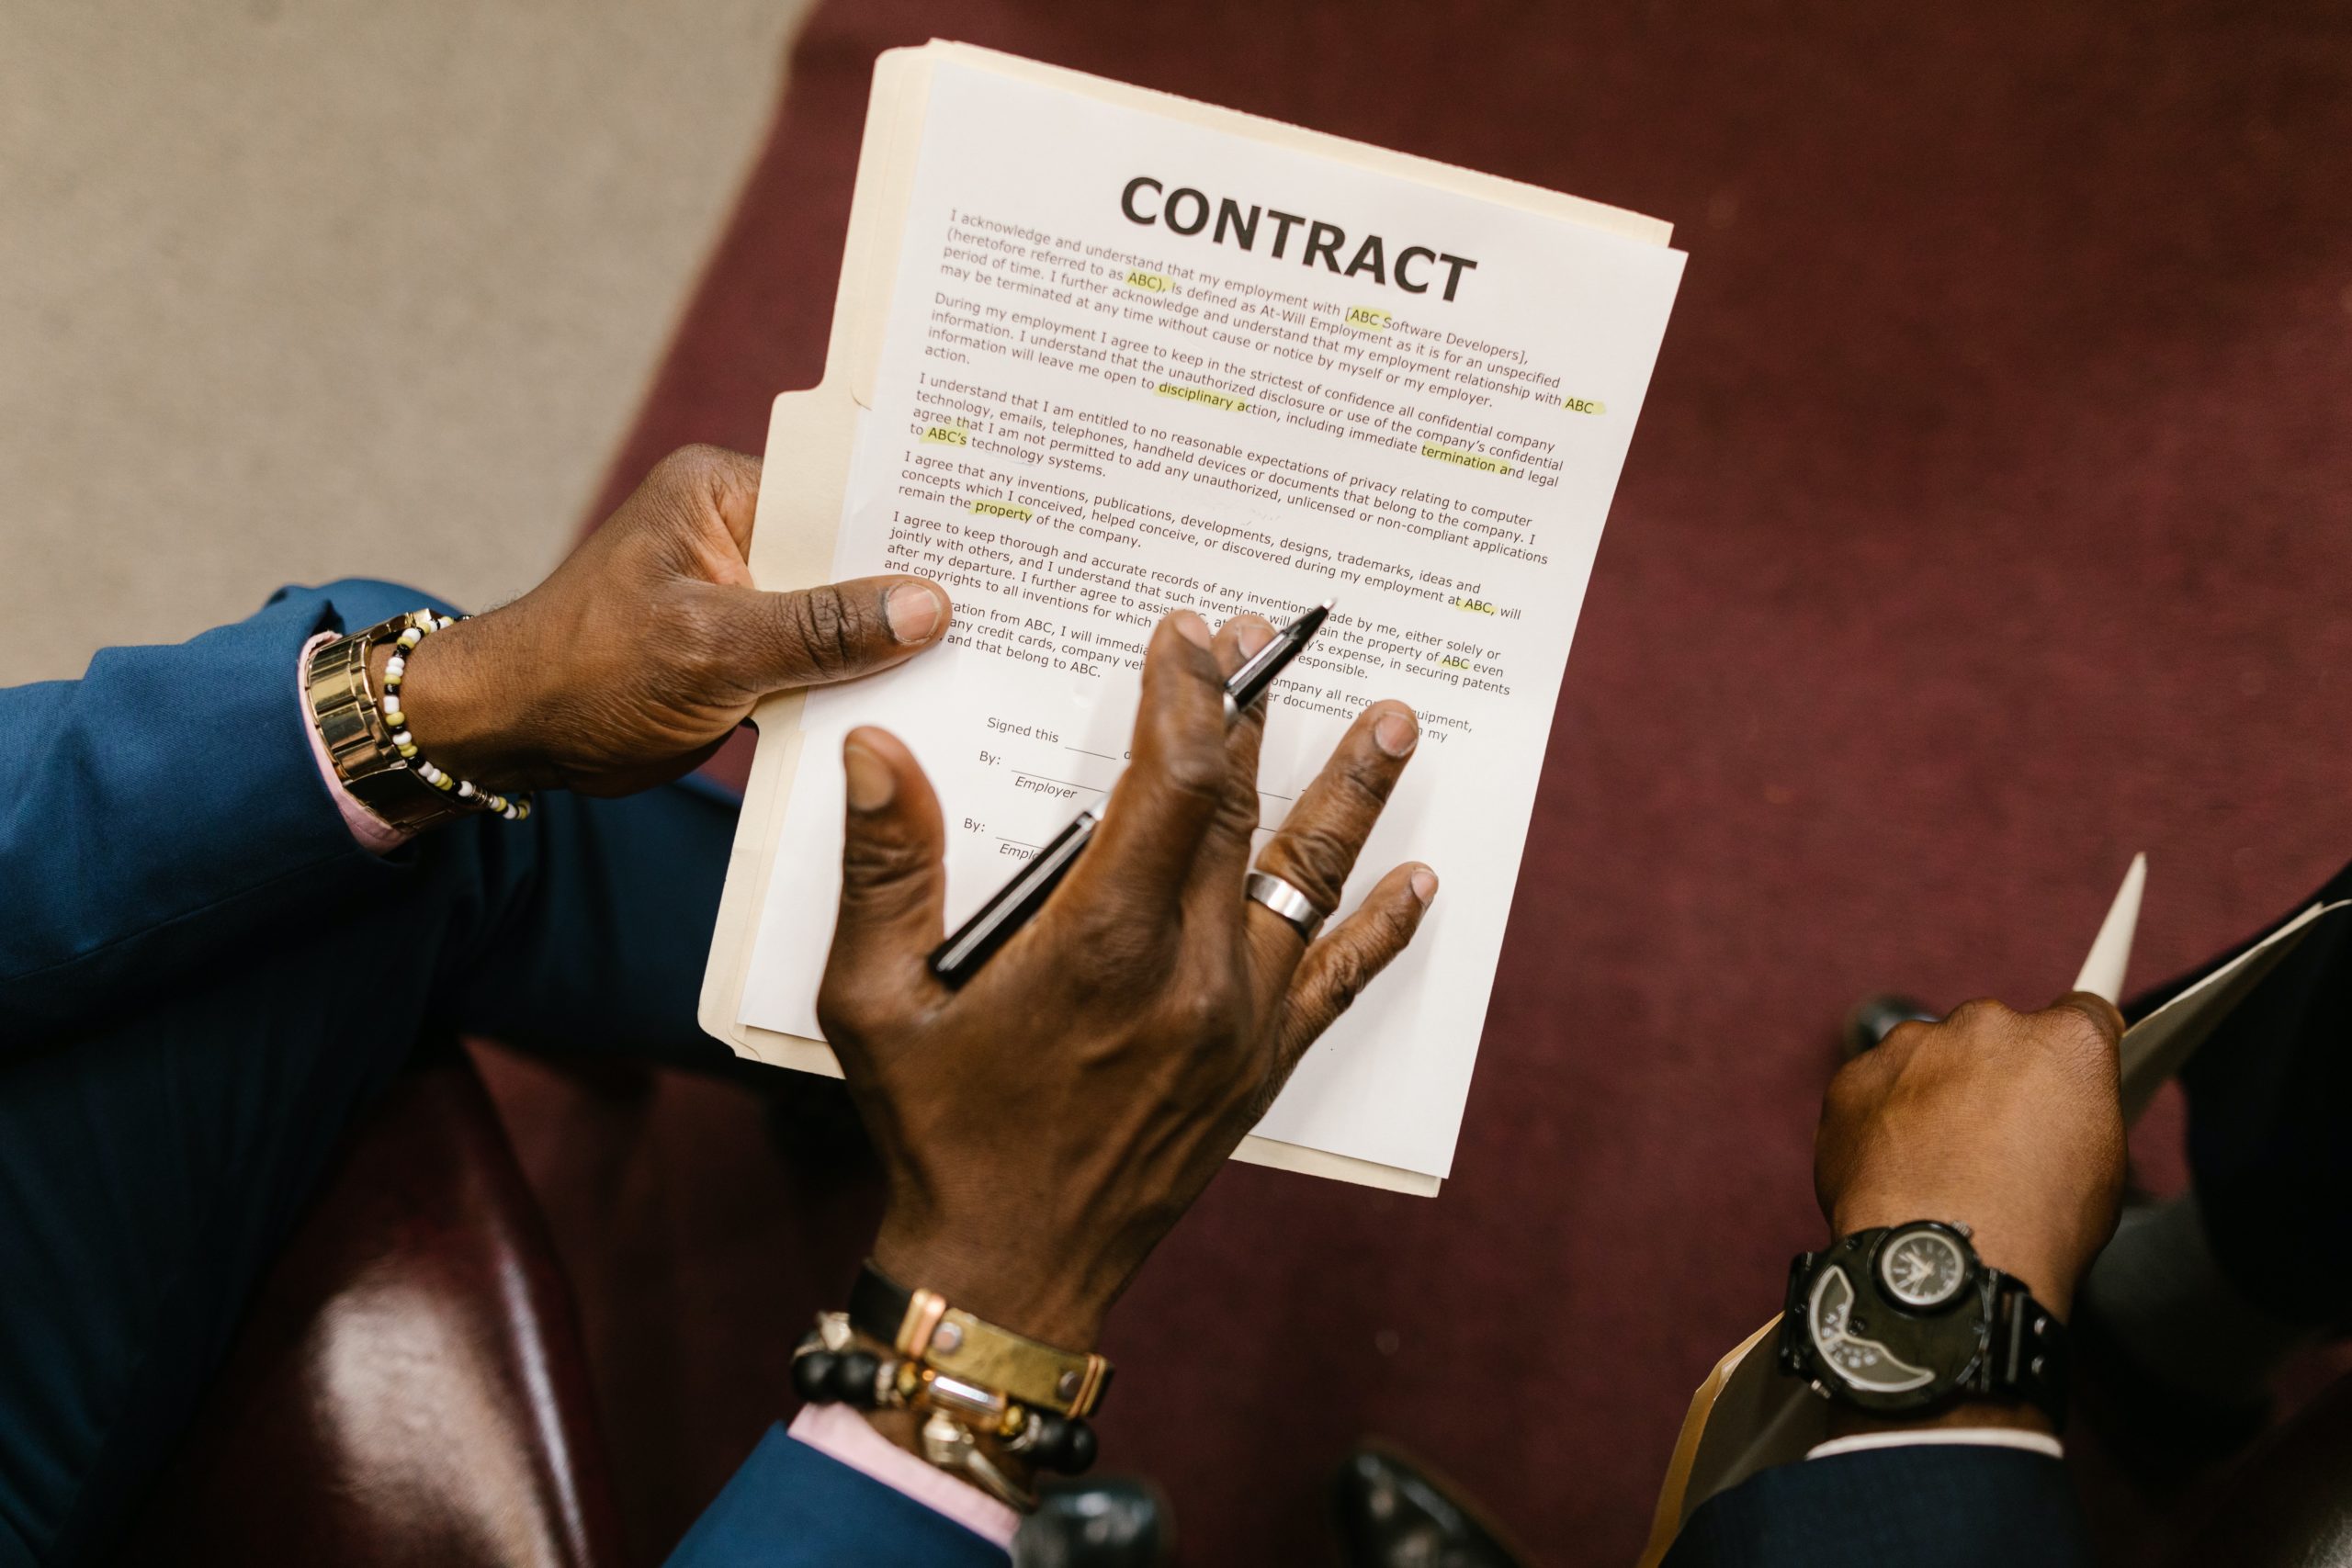 Contract and hands